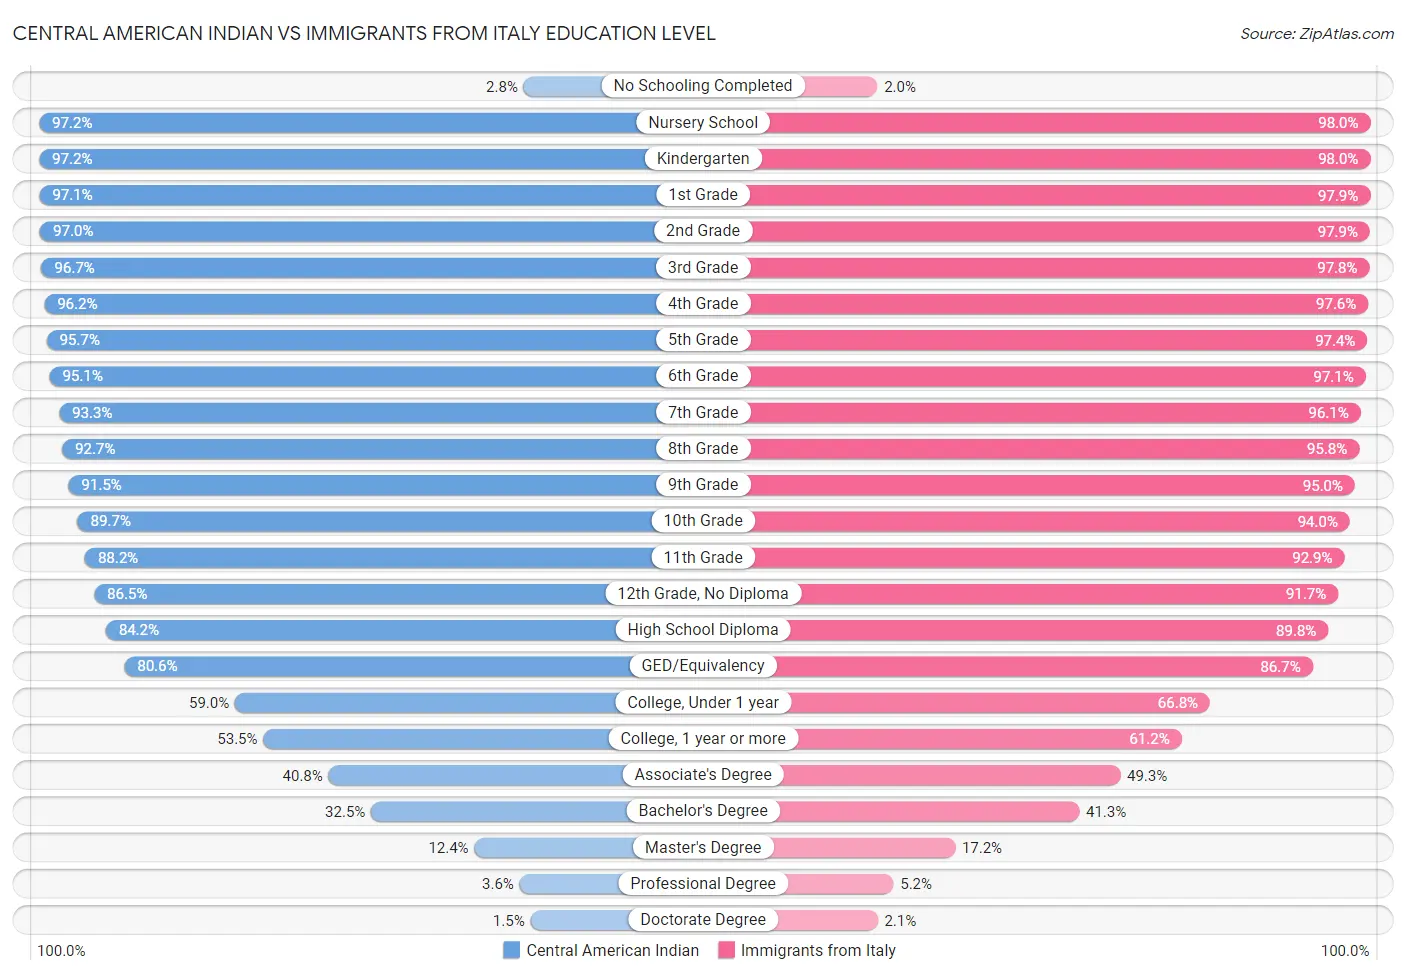 Central American Indian vs Immigrants from Italy Education Level